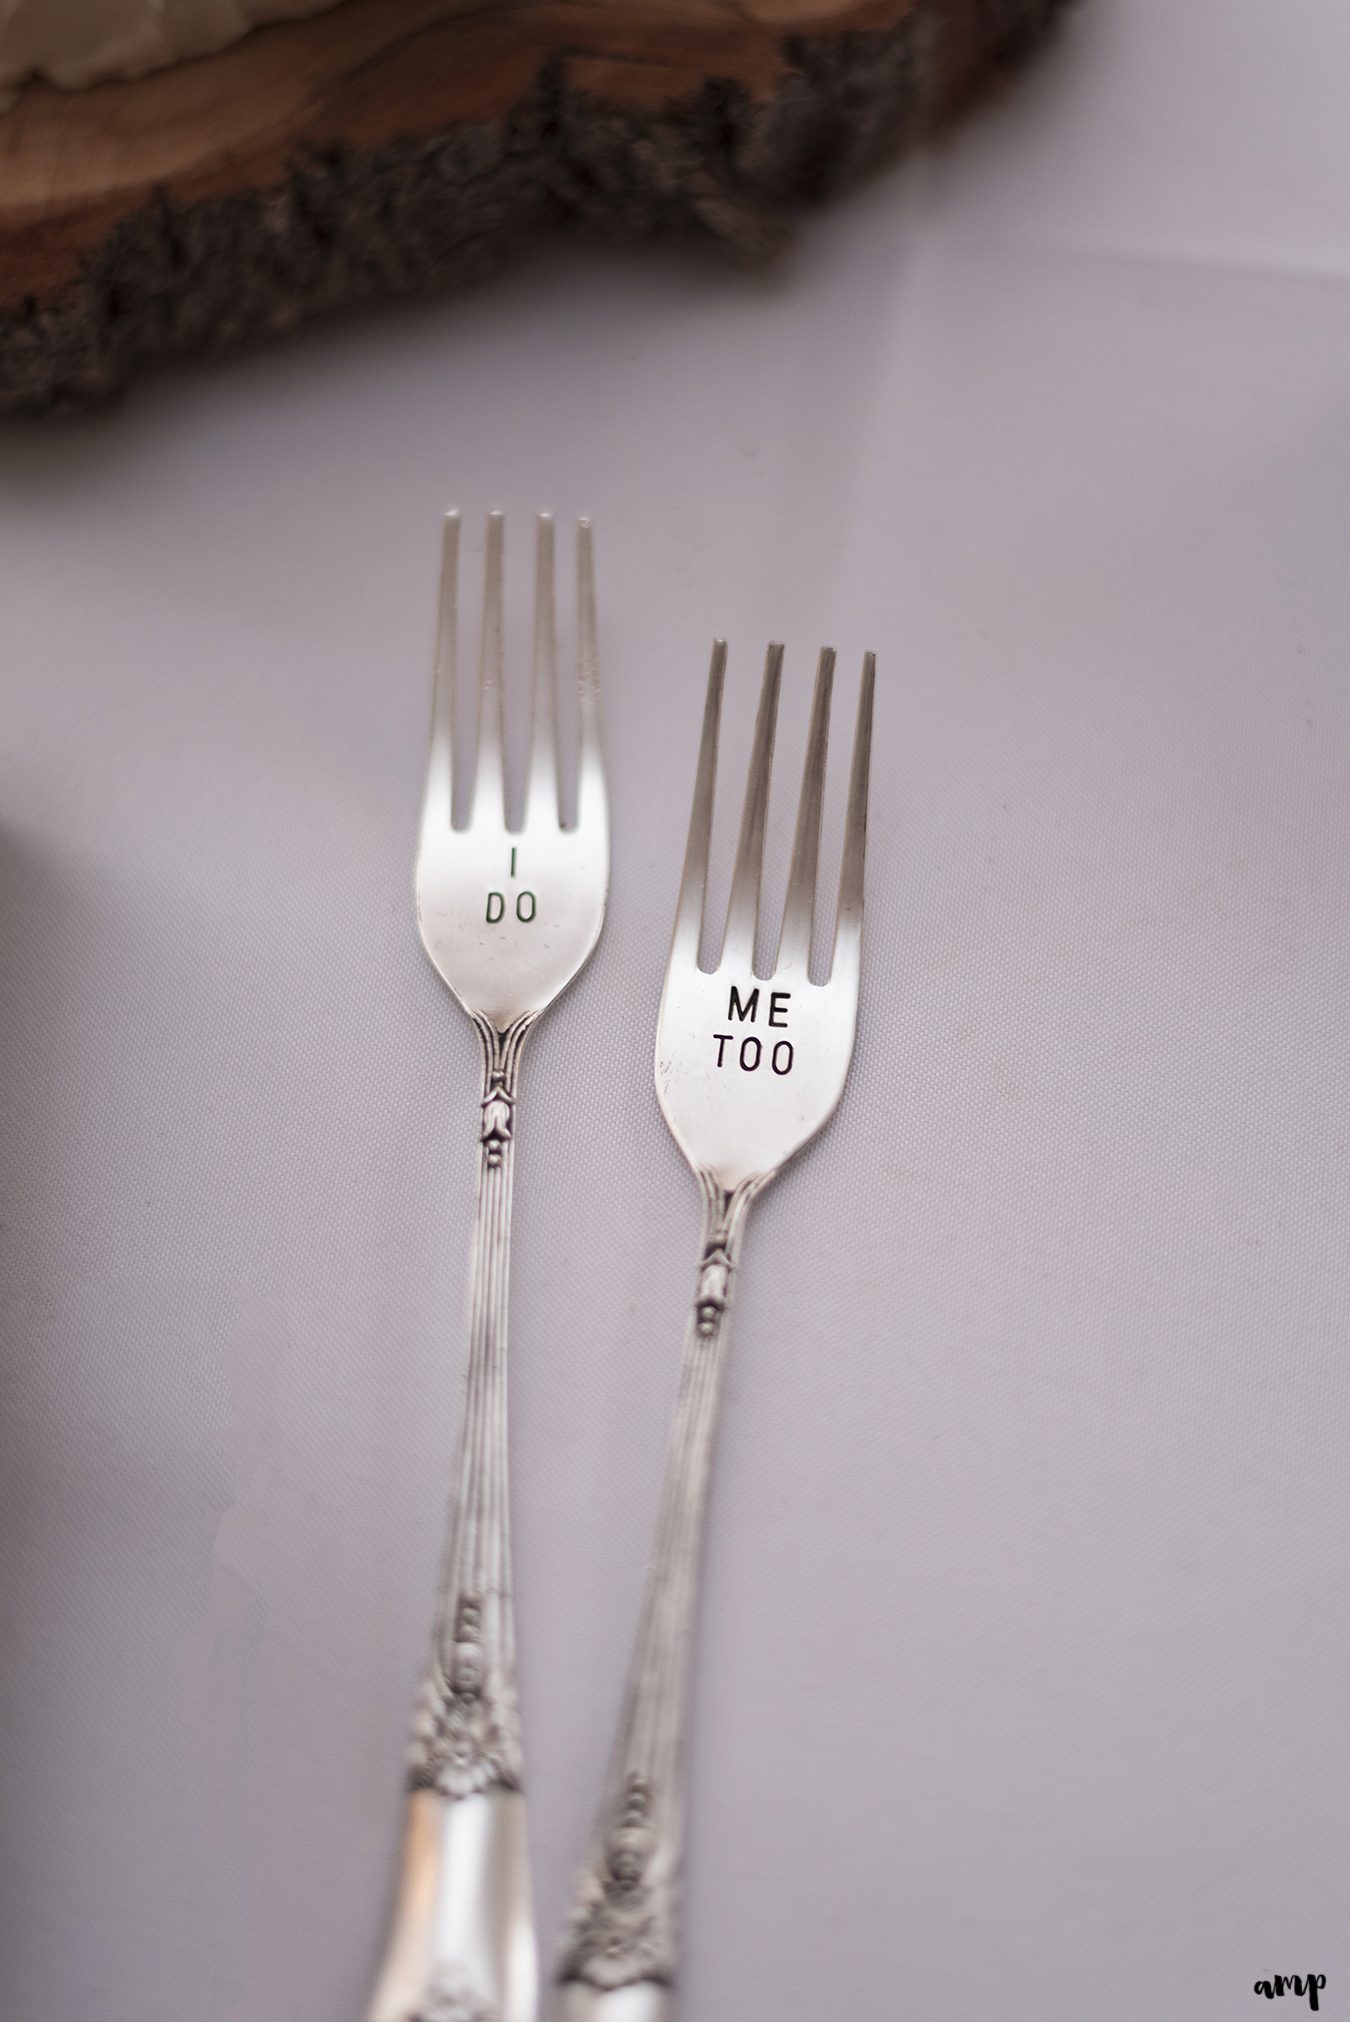 Forks inscribed with "I do" and "Me too"